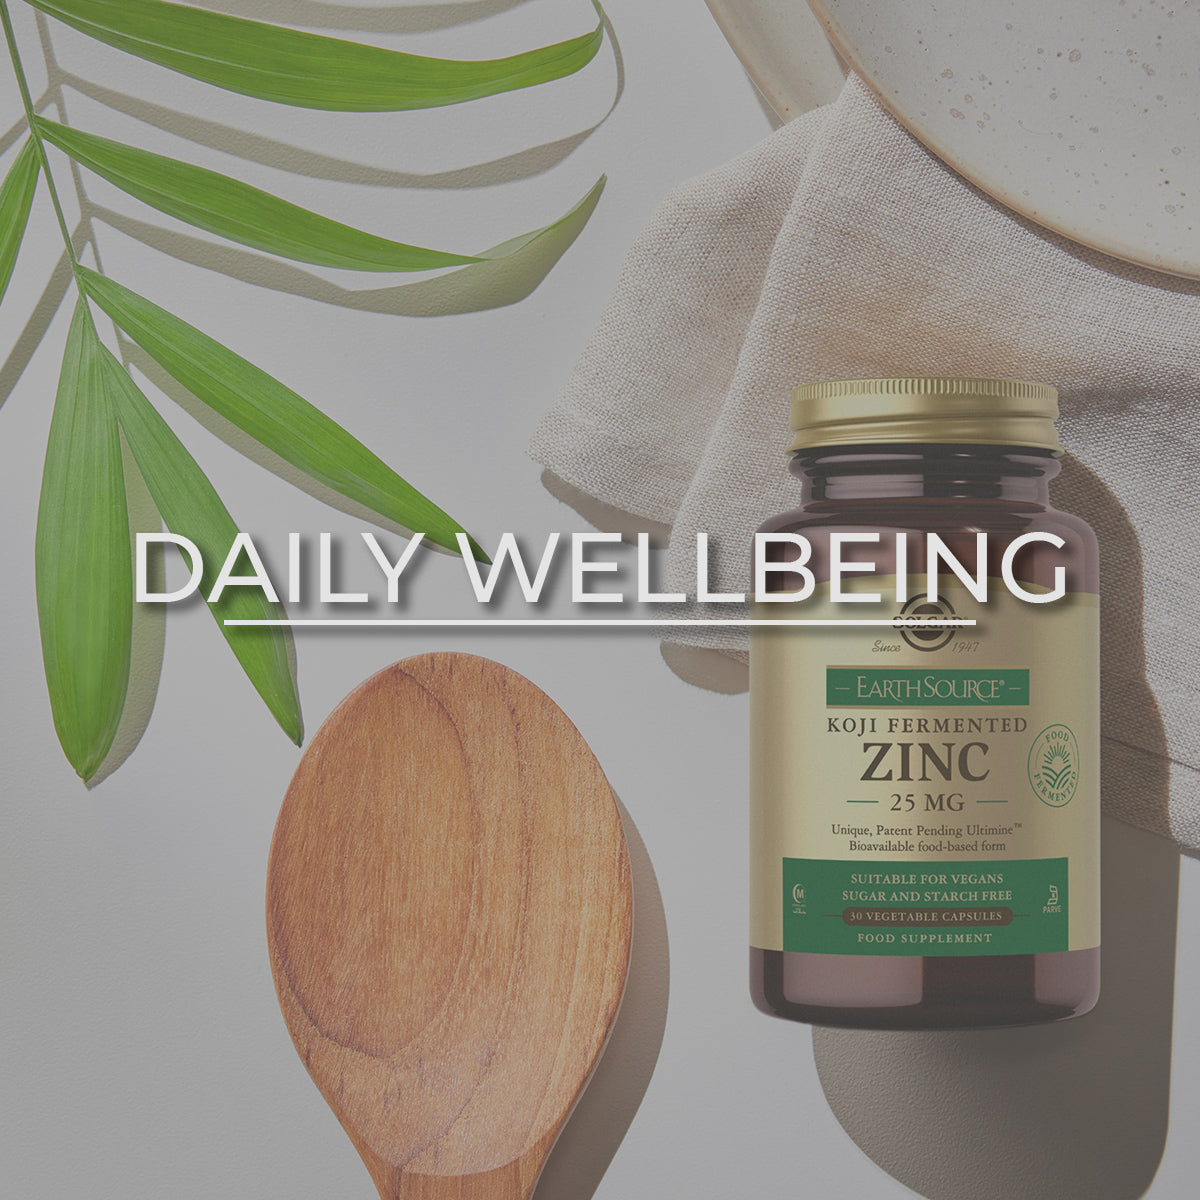 Click here to browse by Daily Wellbeing category